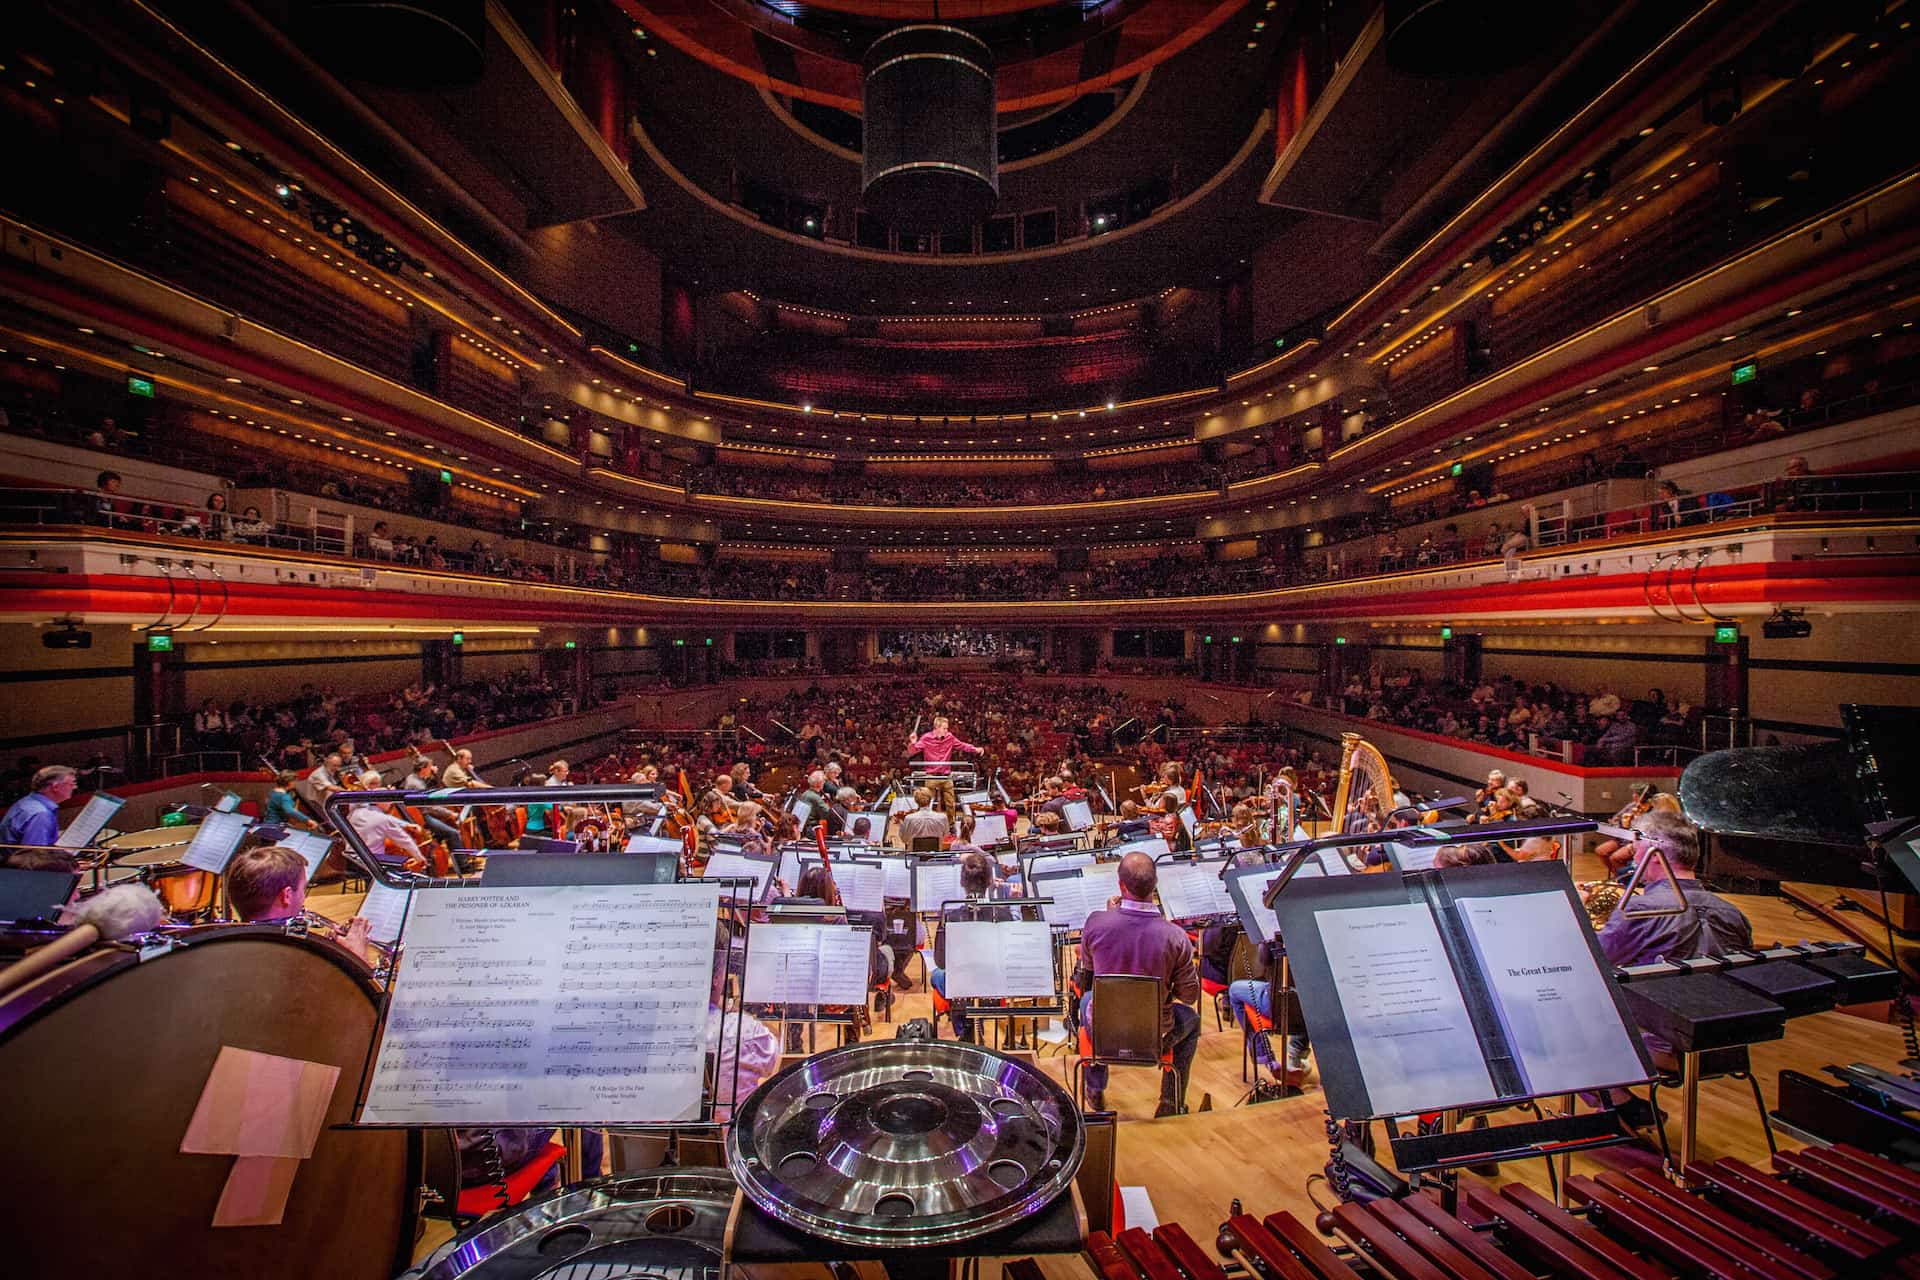 CBSO: The Open Fund for Organisations